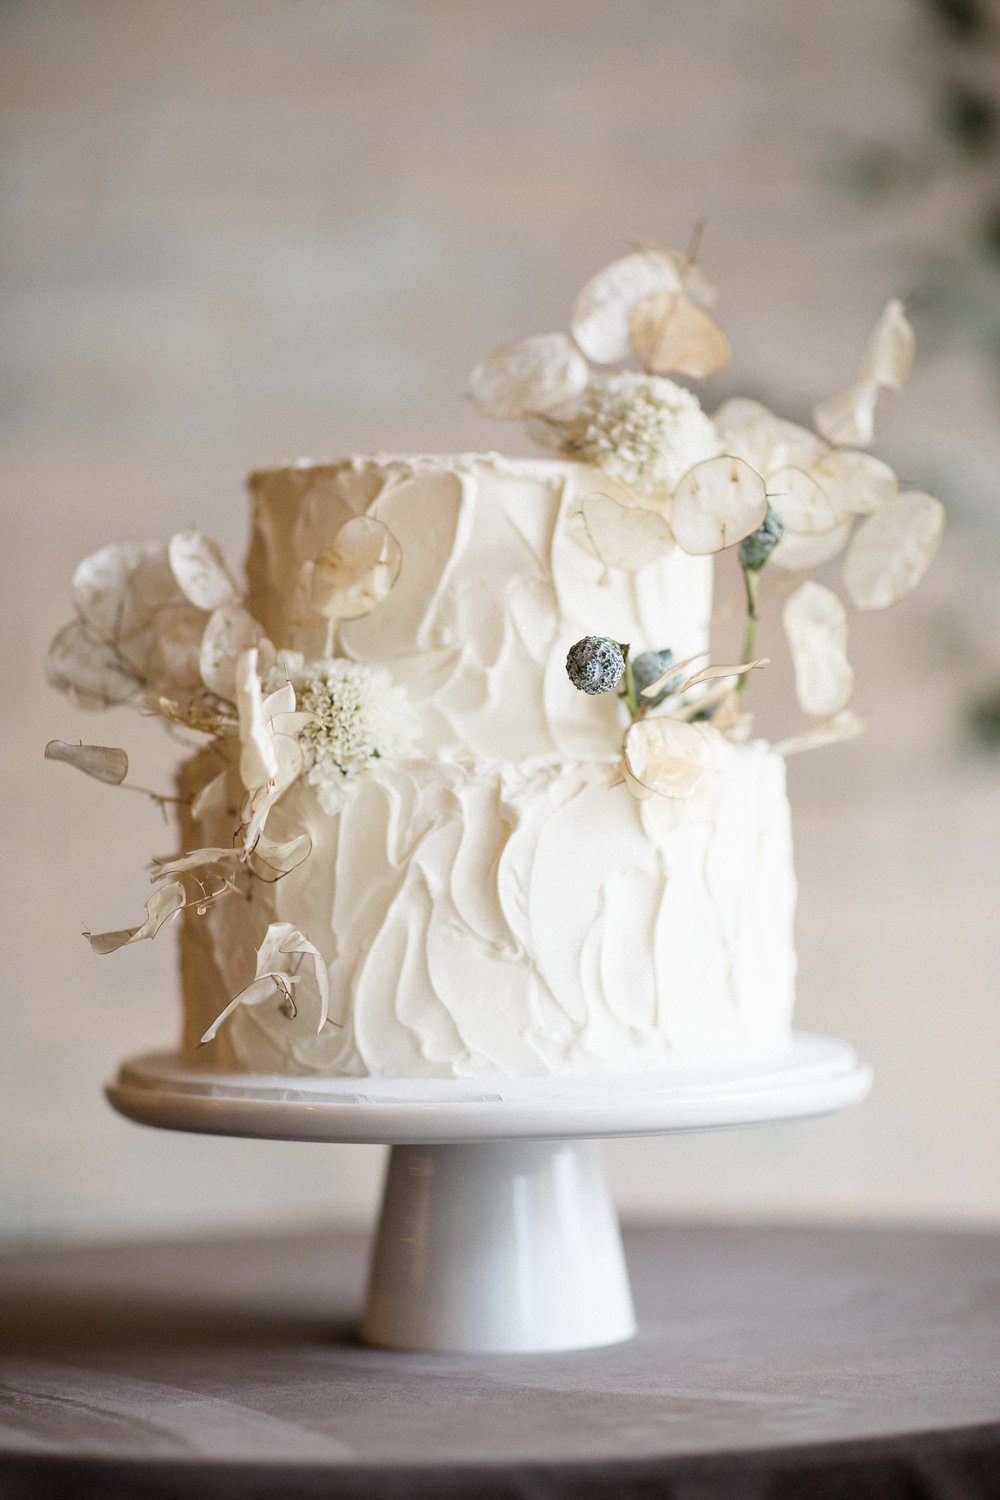 A gorgeous textural wedding cake done with lunaria is ideal for a spring wedding or if you want a refined touch